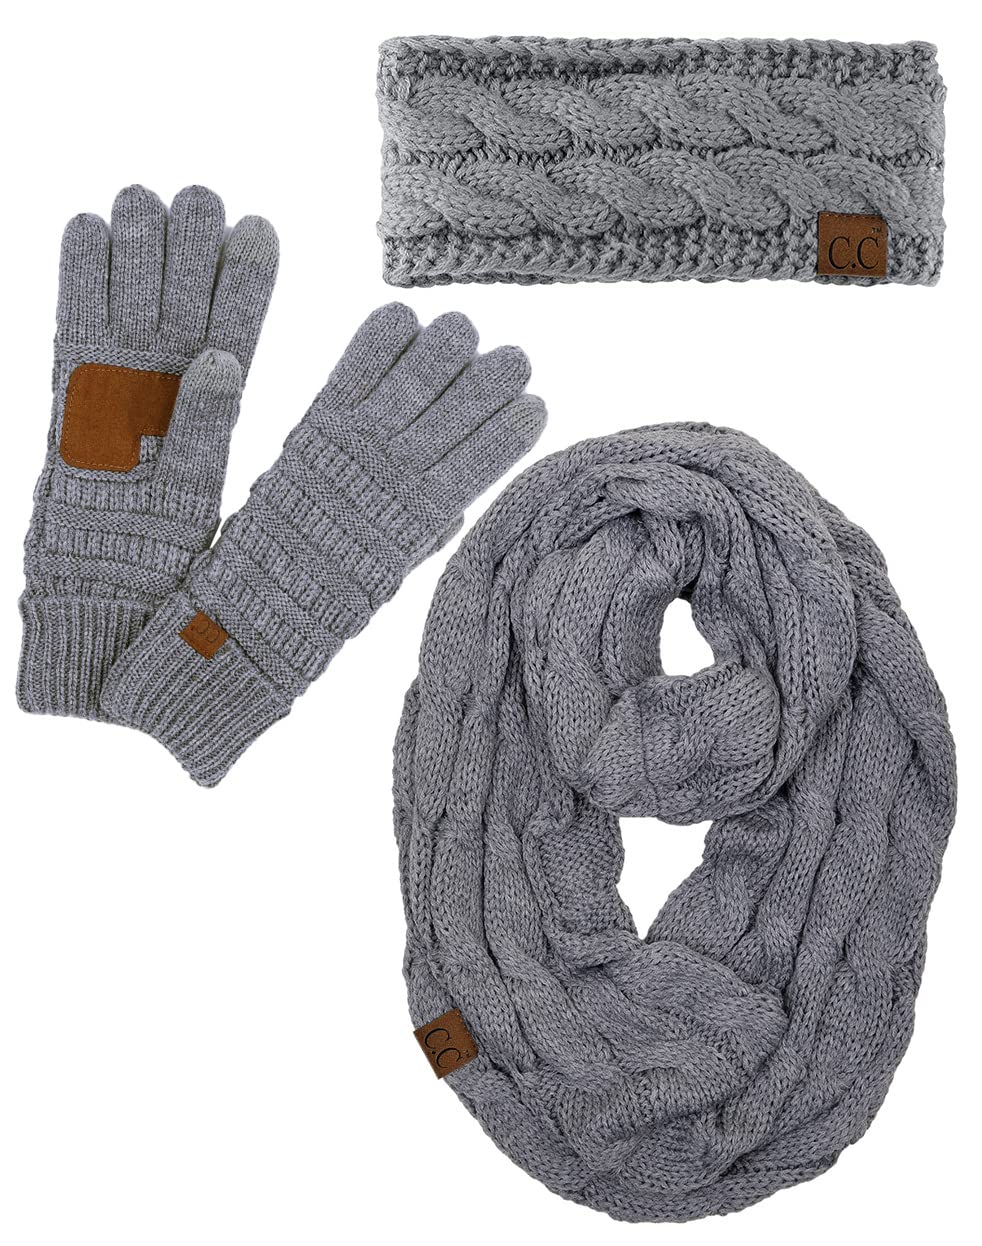 Headband, Scarf & Gloves Matching Set by Funky Junque